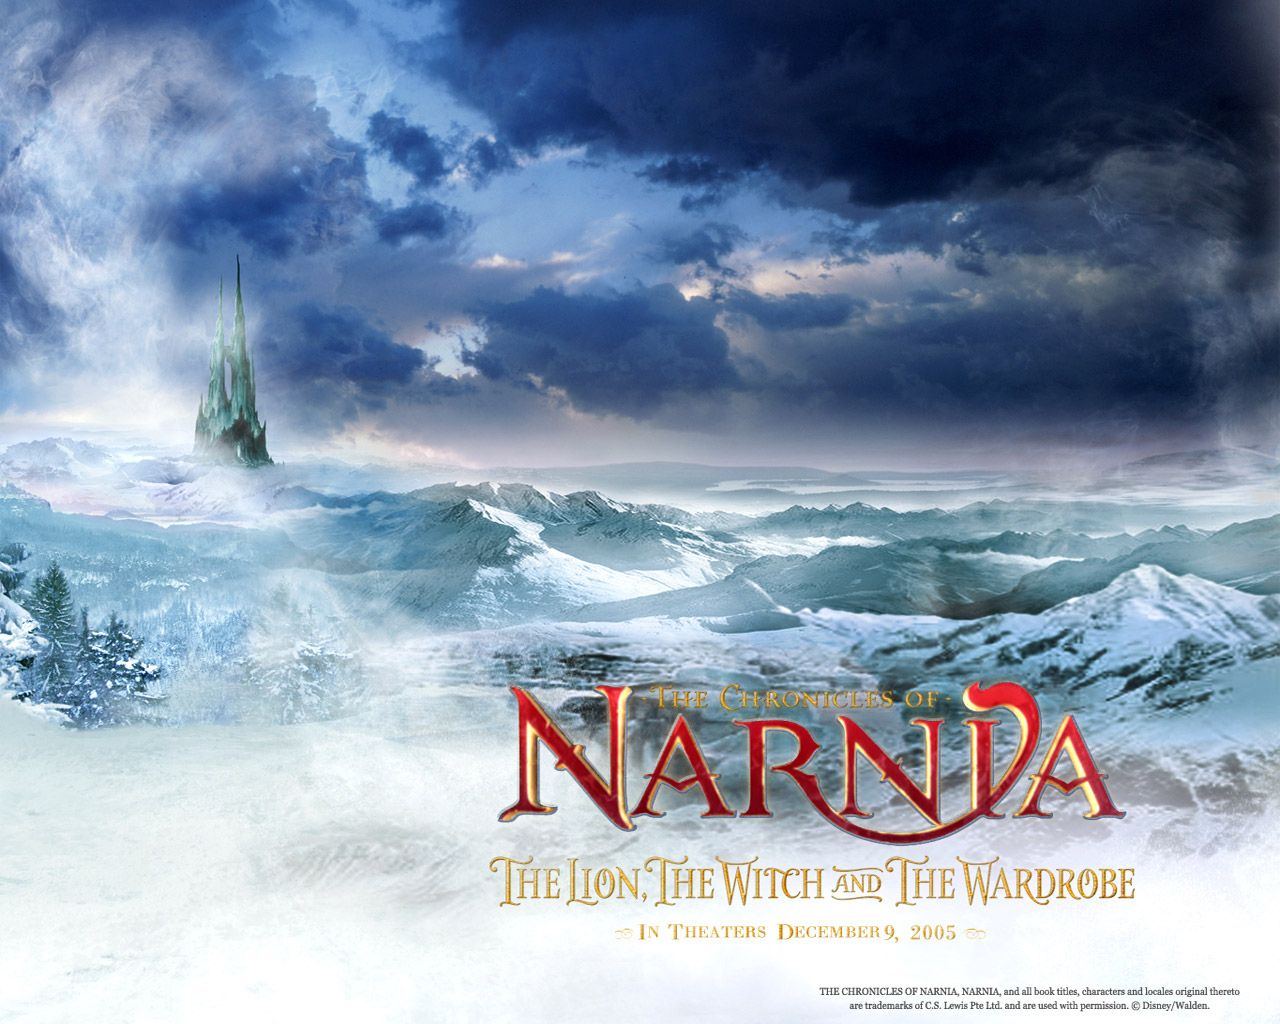 Chronicles of Narnia Desktop Background. Xenoblade Chronicles 3DS Wallpaper, Xenoblade Chronicles X Wallpaper HD and Jovian Chronicles Wallpaper